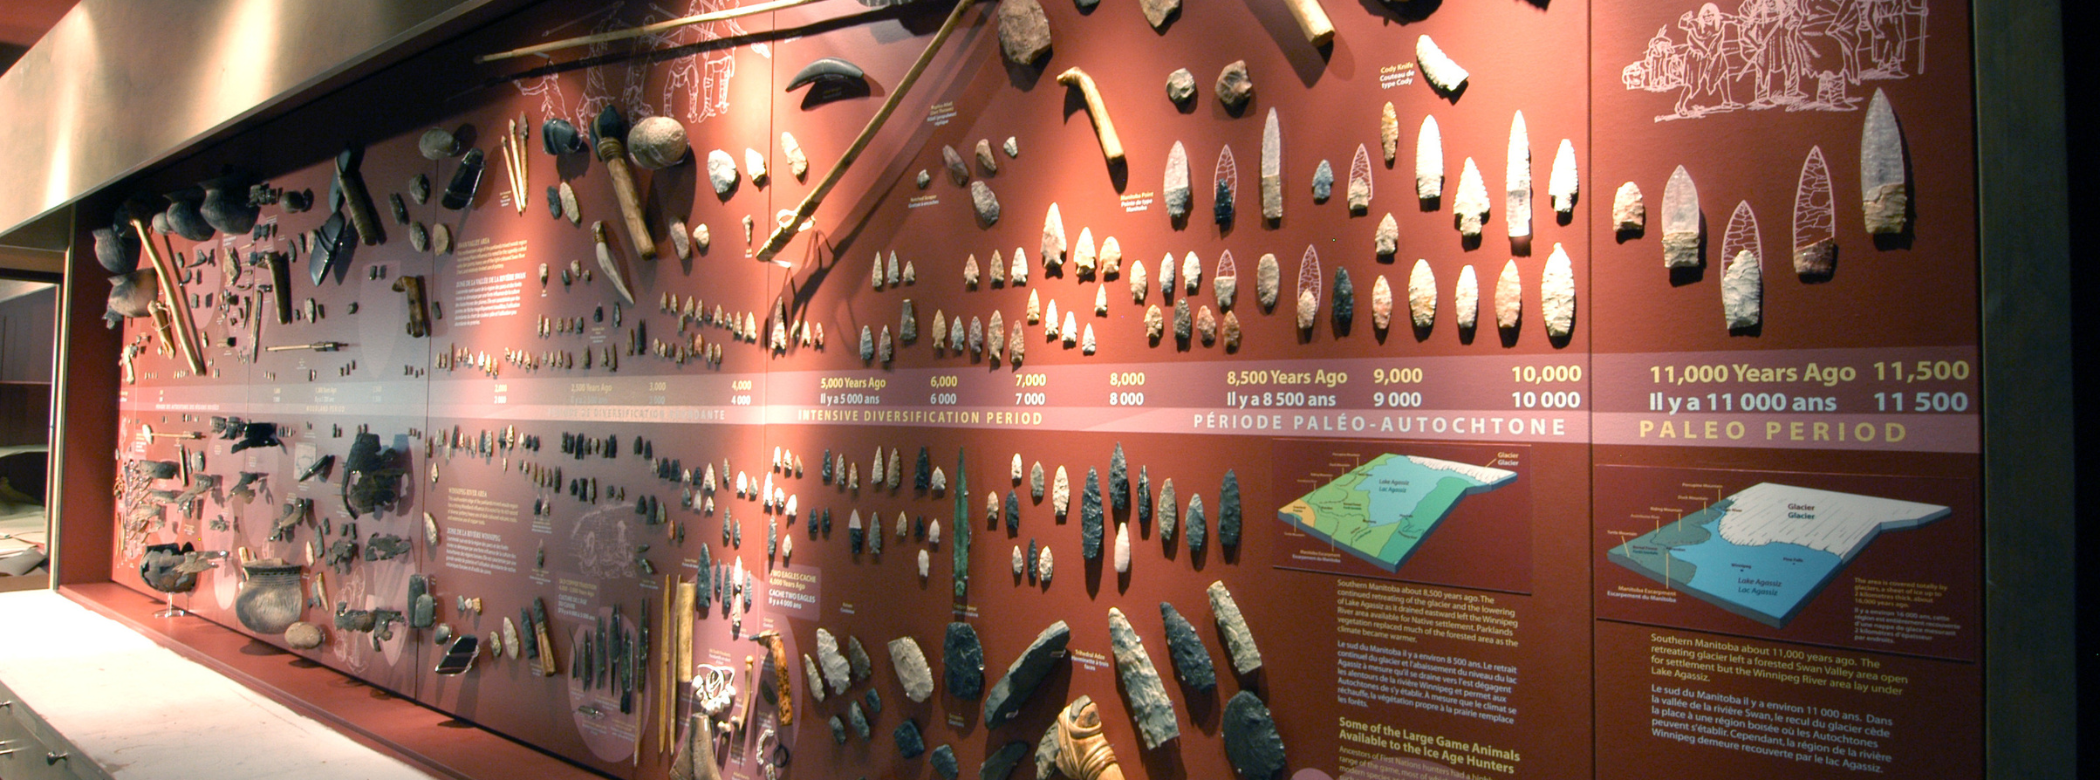 Hundreds of archaeological artifacts attached to a gallery wall, including spears, arrowheads, axes, and ceramic sherds.